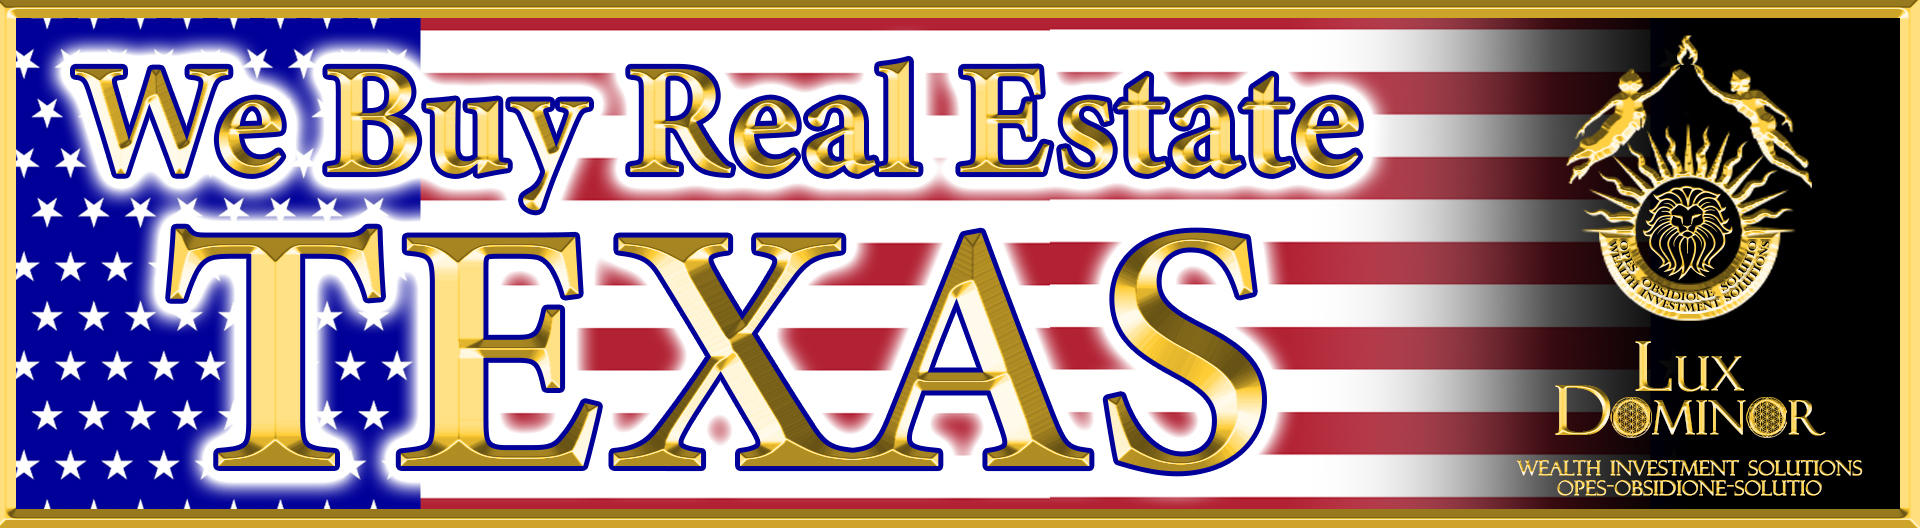 Luxdominor.com - Real Estate Investments - American Pride Usa Land Of The Free, Home Of The Brave! Banner